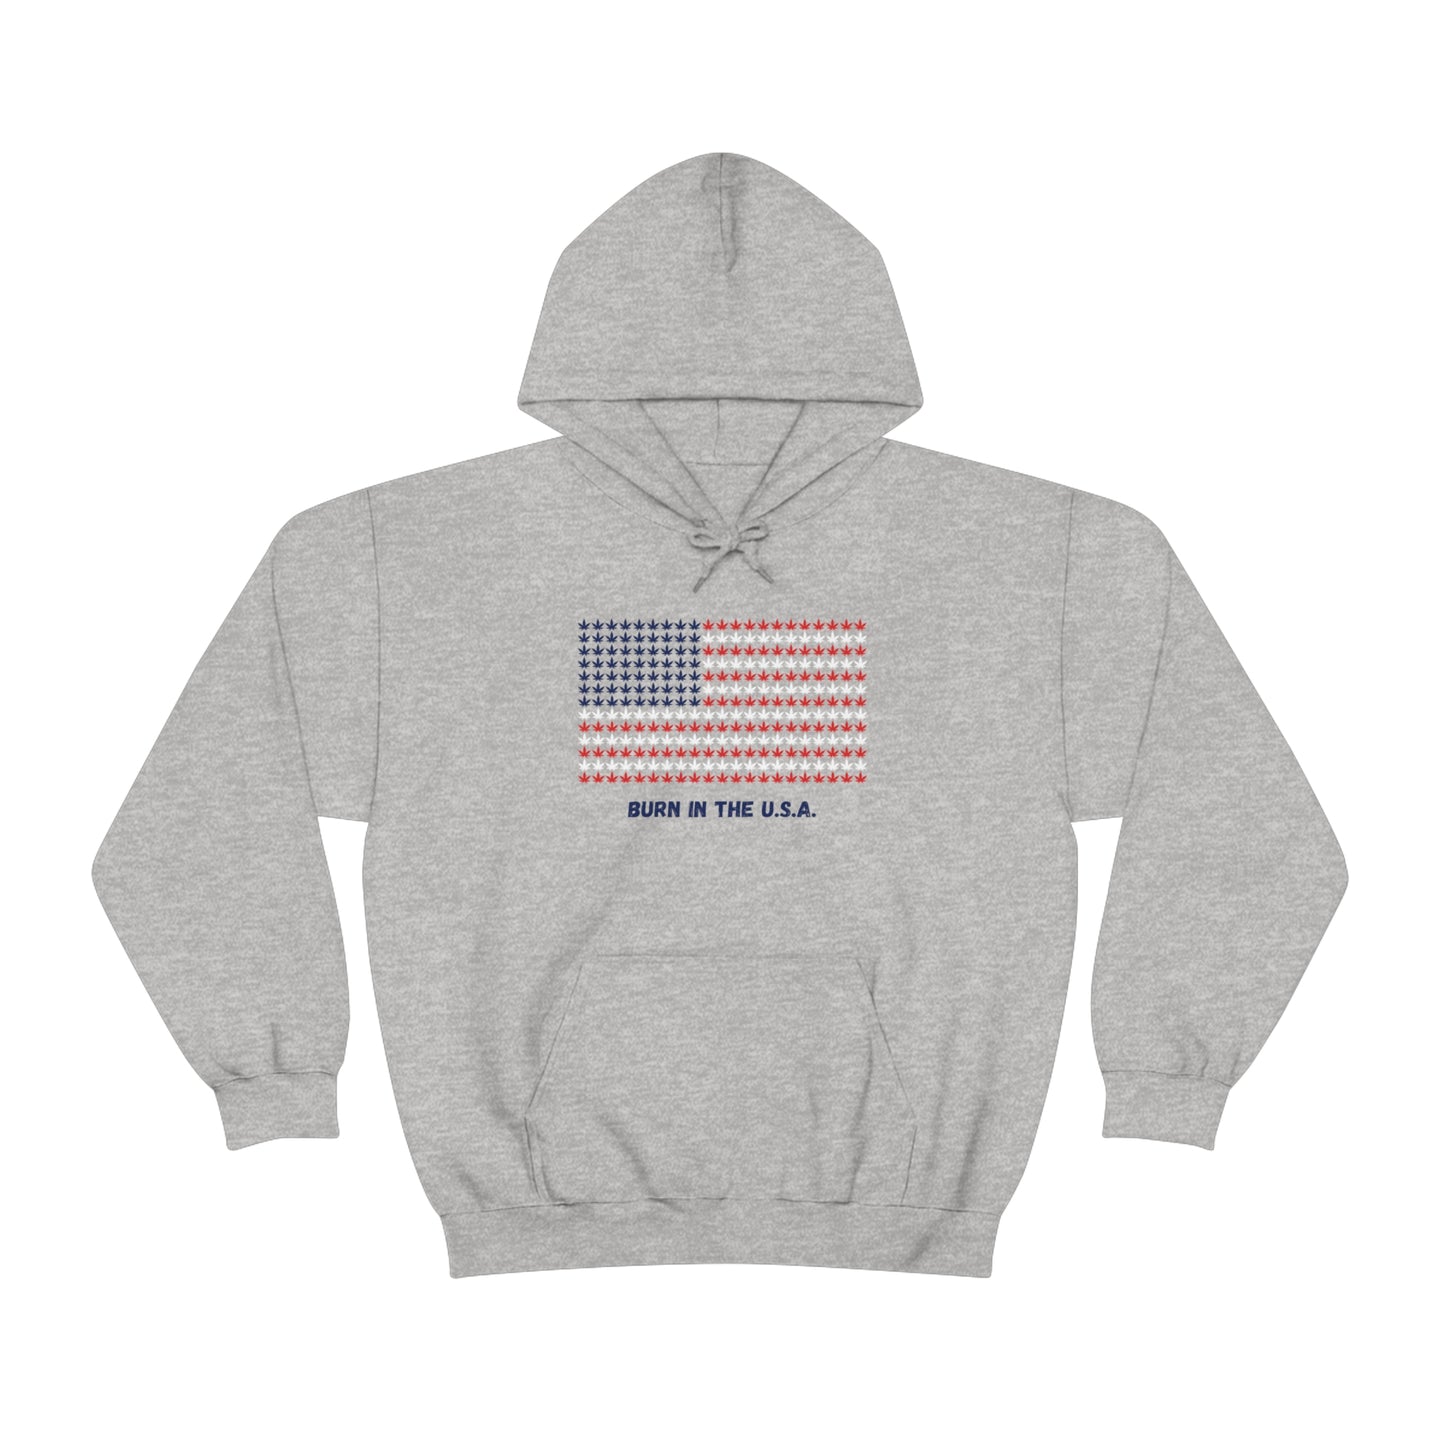 Burn in the USA Hoodie (Grey) with Red White & Blue Mini Cannabis Leaf Flag Graphic -  Ignite Your Style with 420 Patriotic Pride!